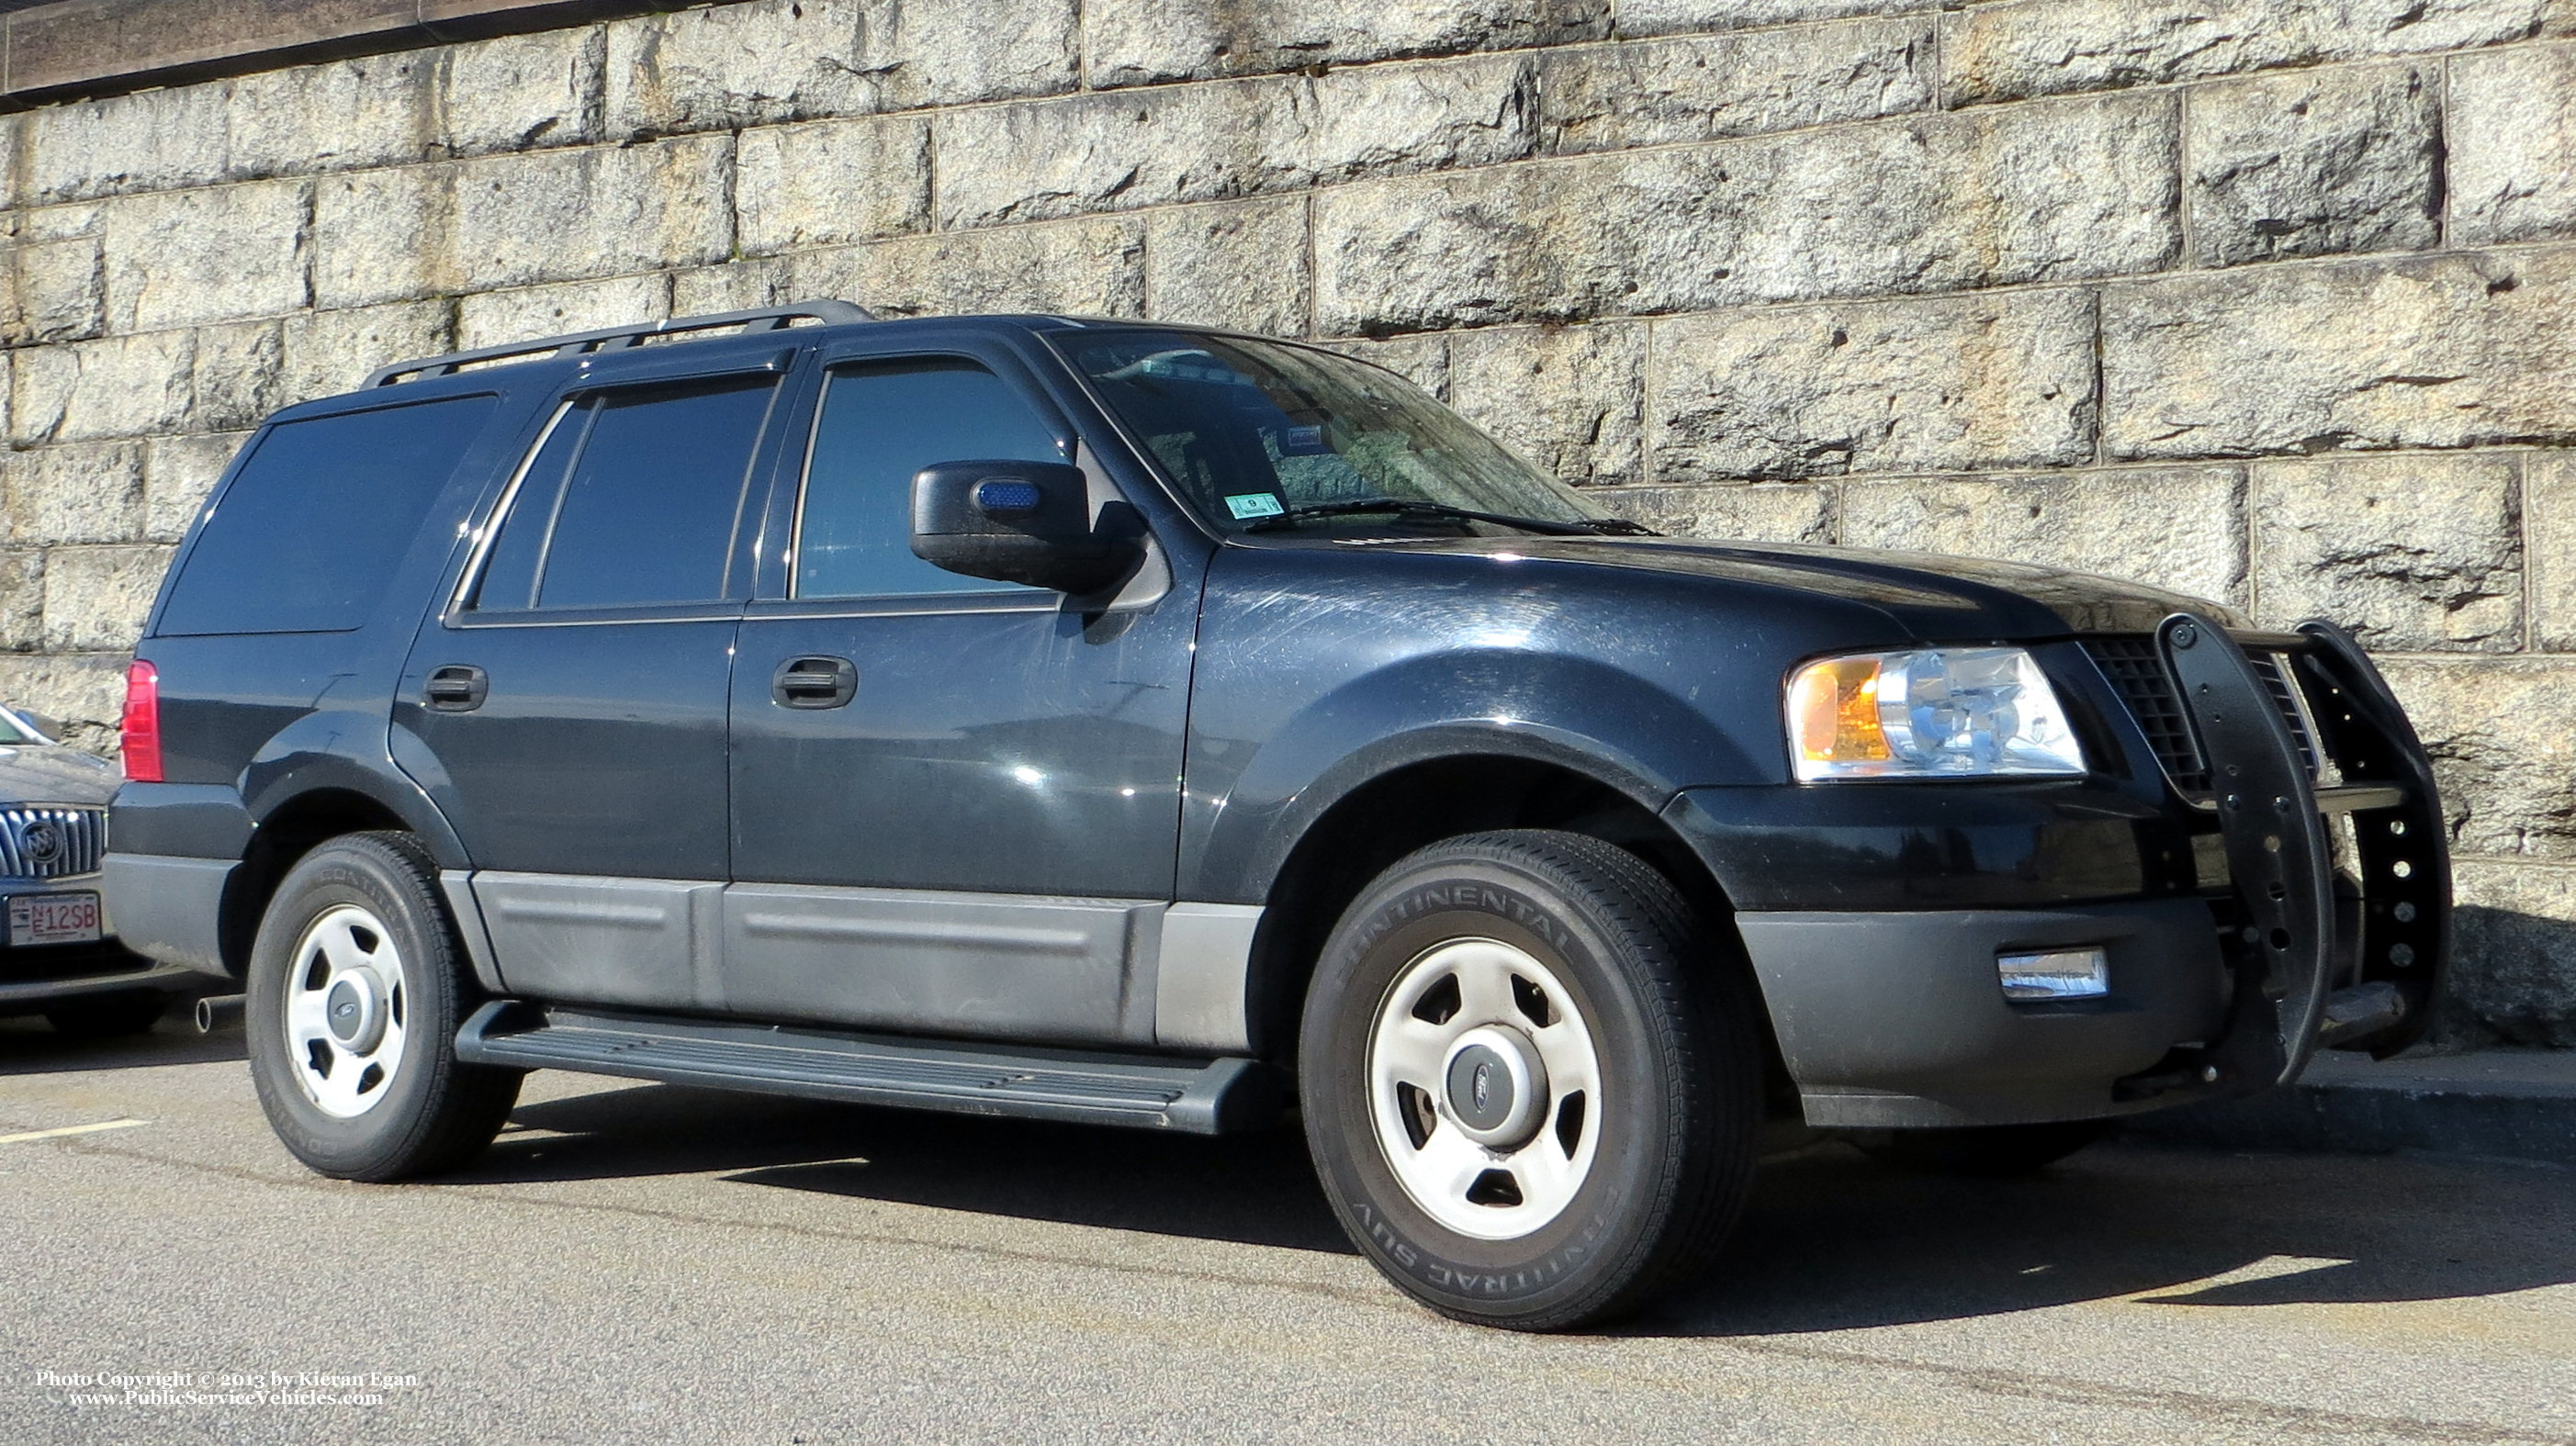 A photo  of Brockton Police
            Unmarked Unit, a 2002-2006 Ford Expedition             taken by Kieran Egan